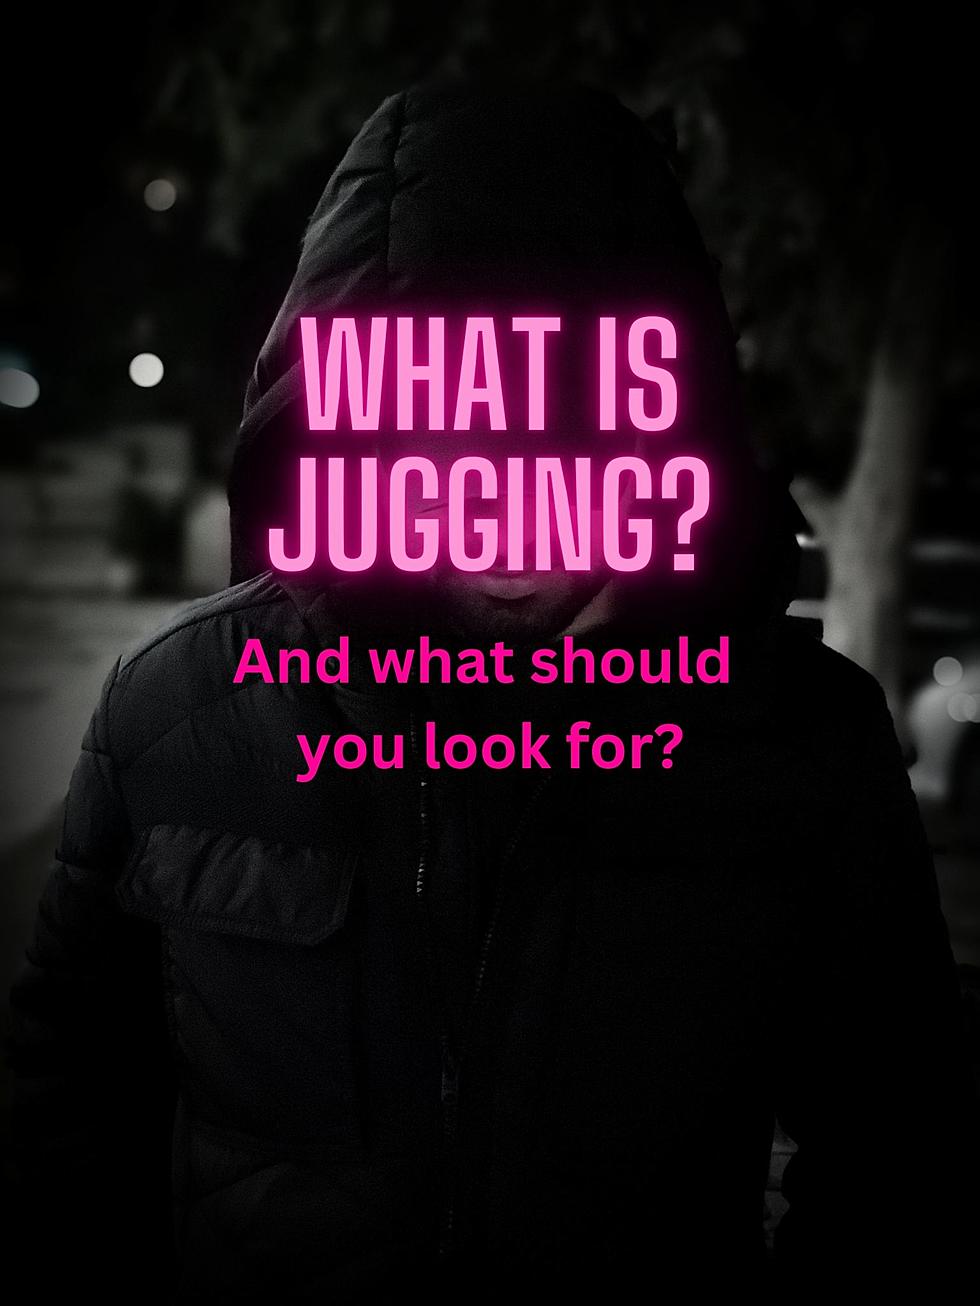 ‘Jugging’ Is The Latest Criminal Tactic To Look Out For In Michigan